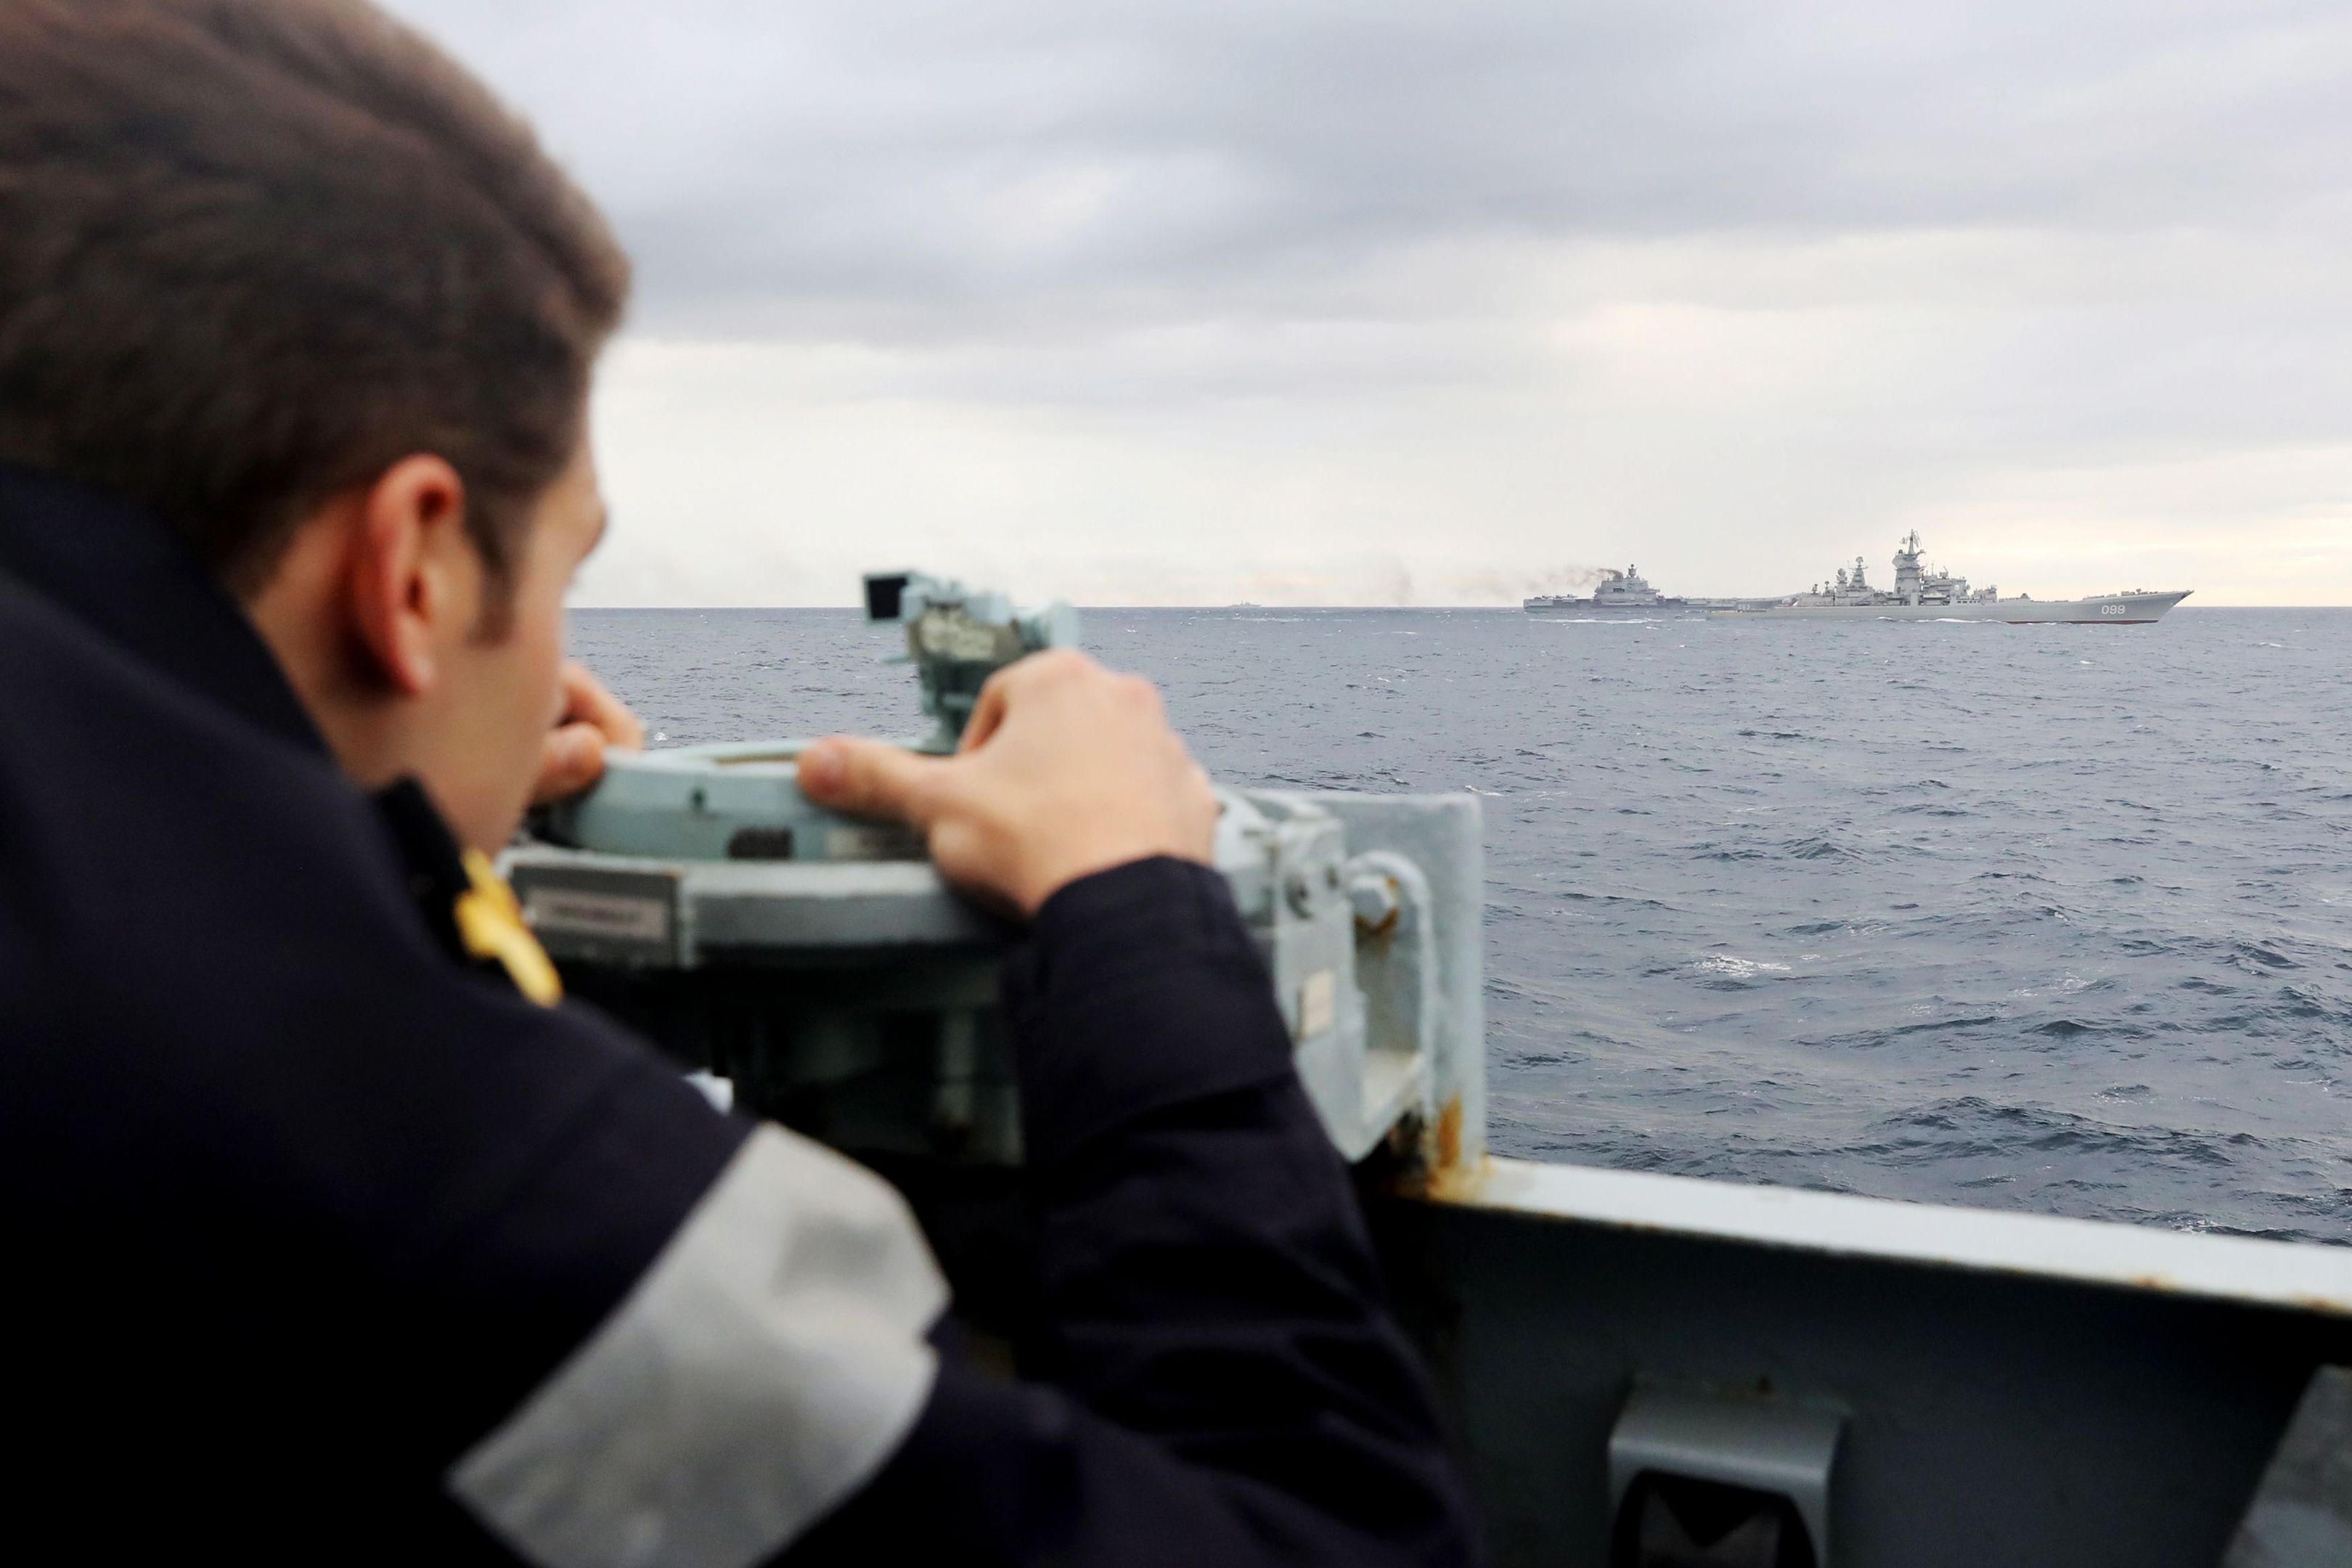 A Royal Navy lookout onboard HMS Richmond observing a Russian task group during transit through the North Sea.